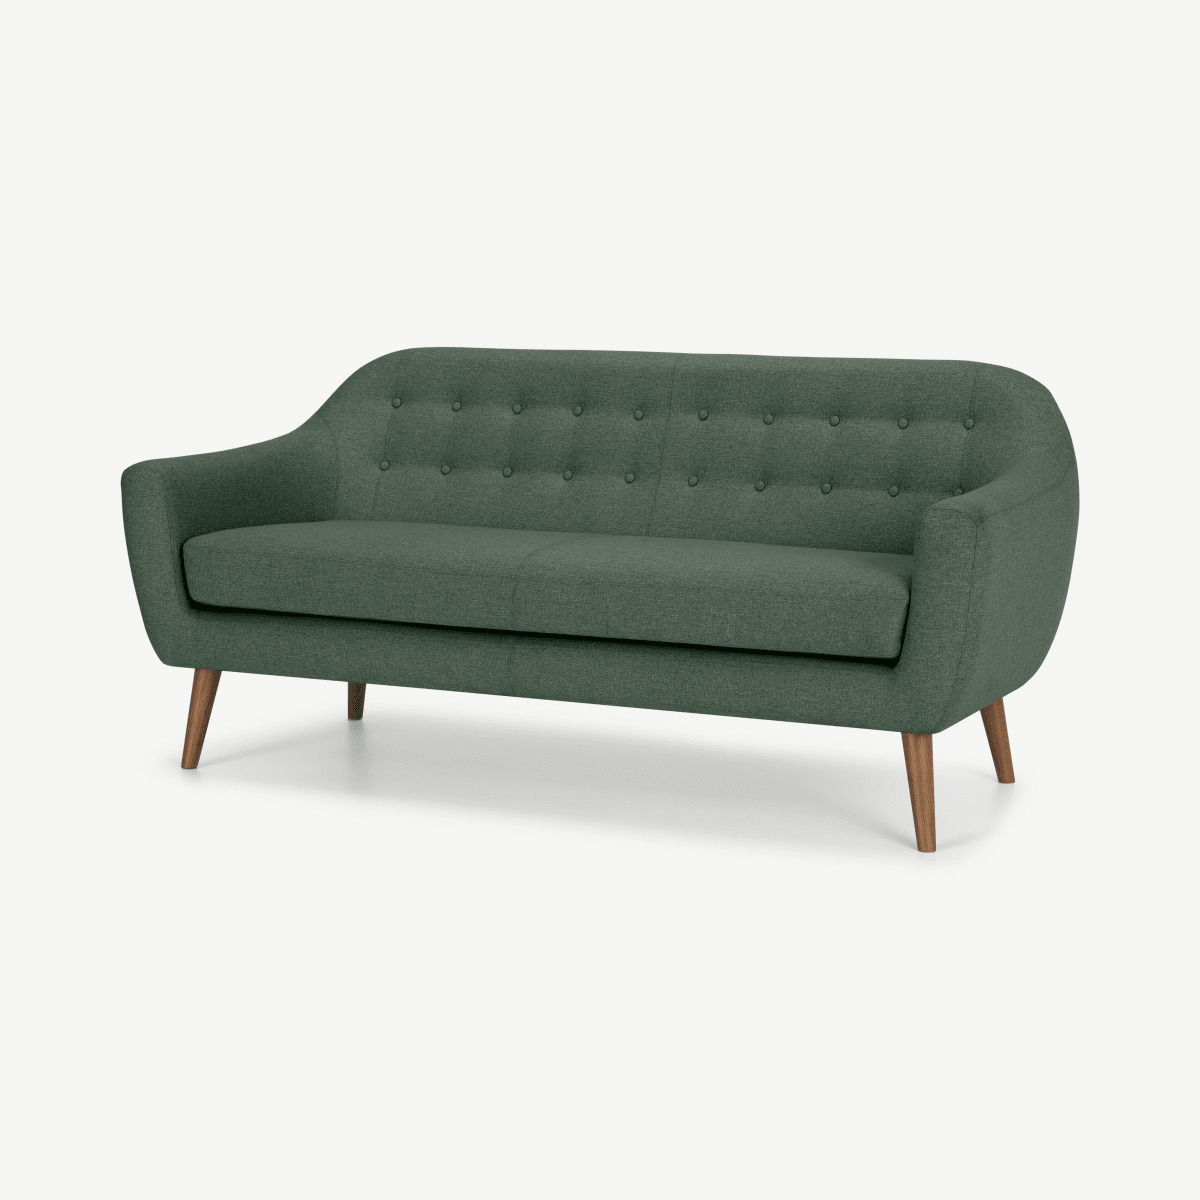 Ritchie 3 Seater Sofa, Darby Green Fabric